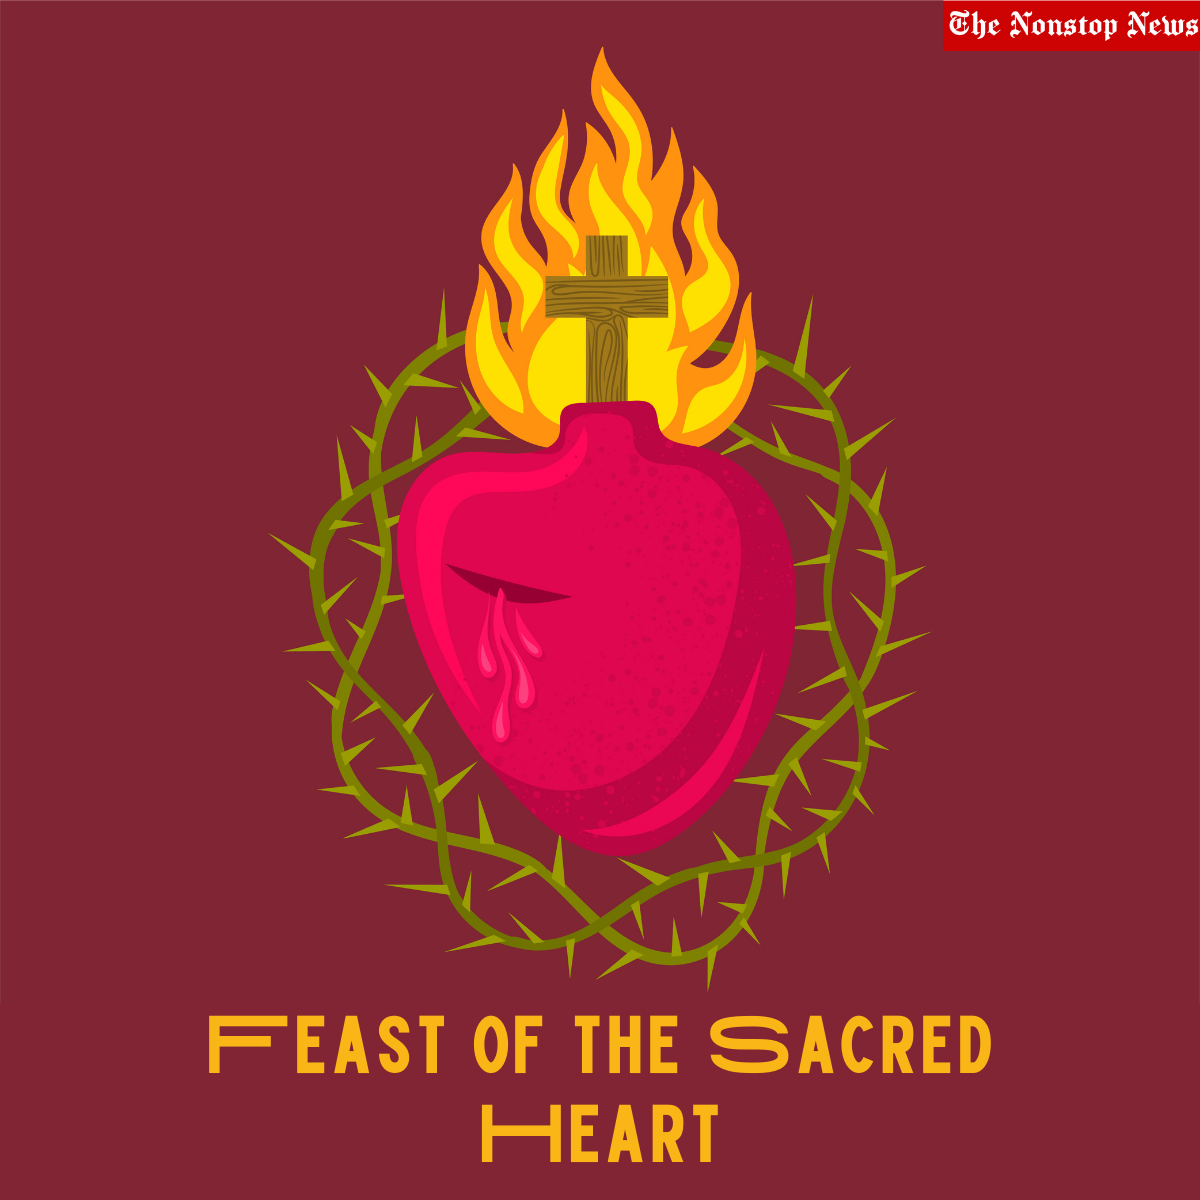 Feast of the Sacred Heart 2022: Wishes, Quotes, Images, Messages, Greetings, Sayings to Share